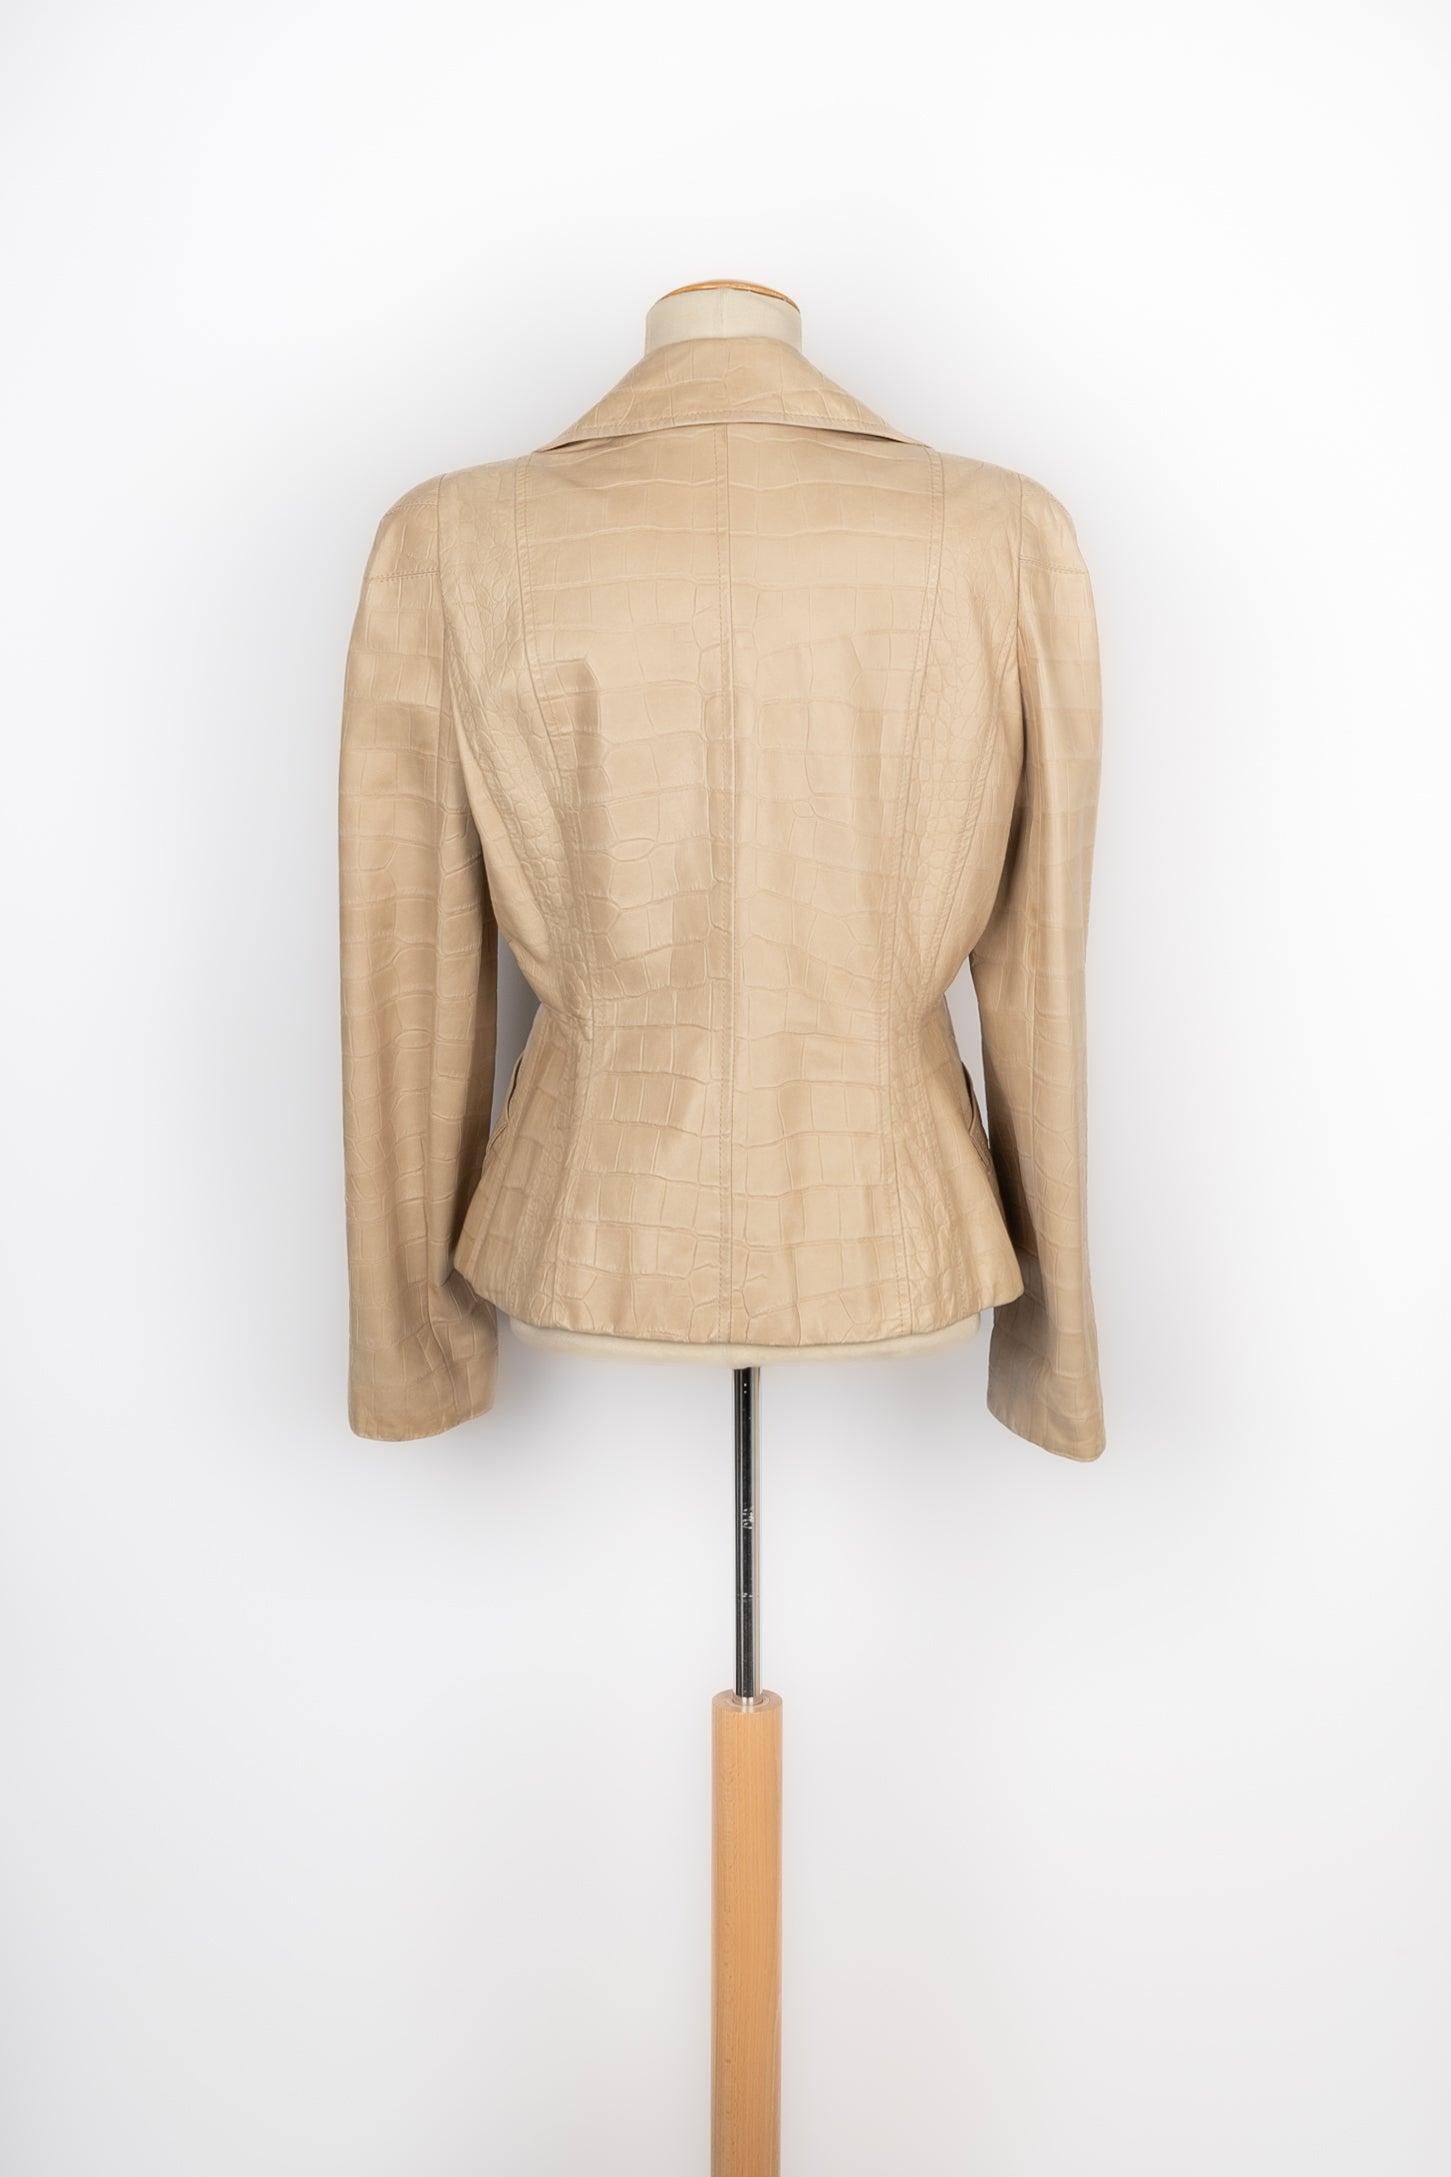 Dior Lamb Leather Jacket with Crocodile Print in Beige Tones, 2005 In Excellent Condition For Sale In SAINT-OUEN-SUR-SEINE, FR